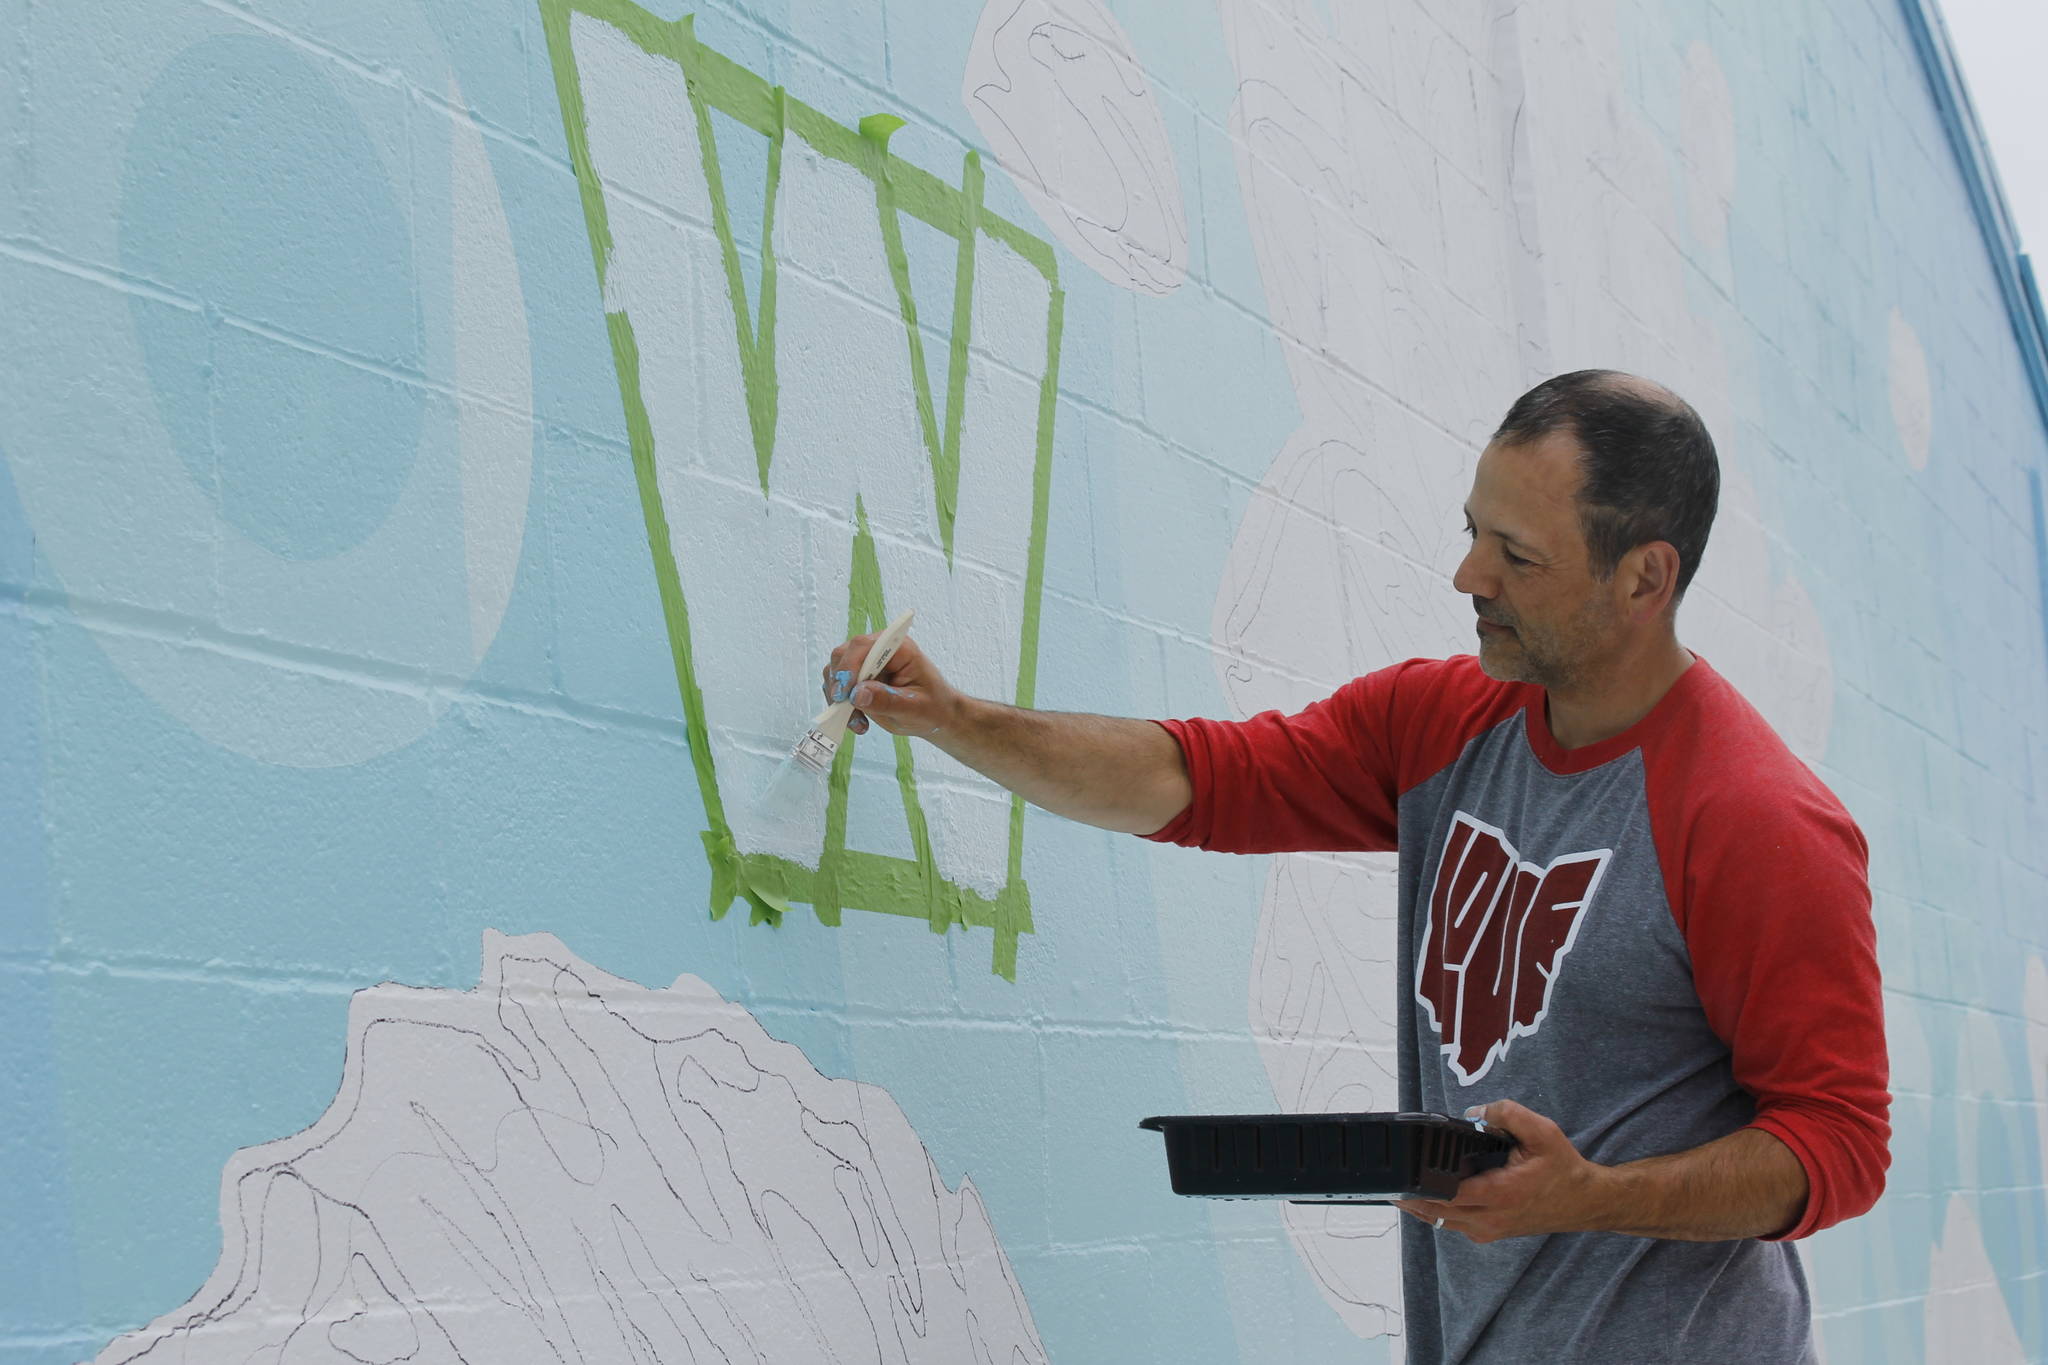 Artist Jeremy Jarvis paints words on his new mural in Langley. (Photo by Kira Erickson/Whidbey News-Times)